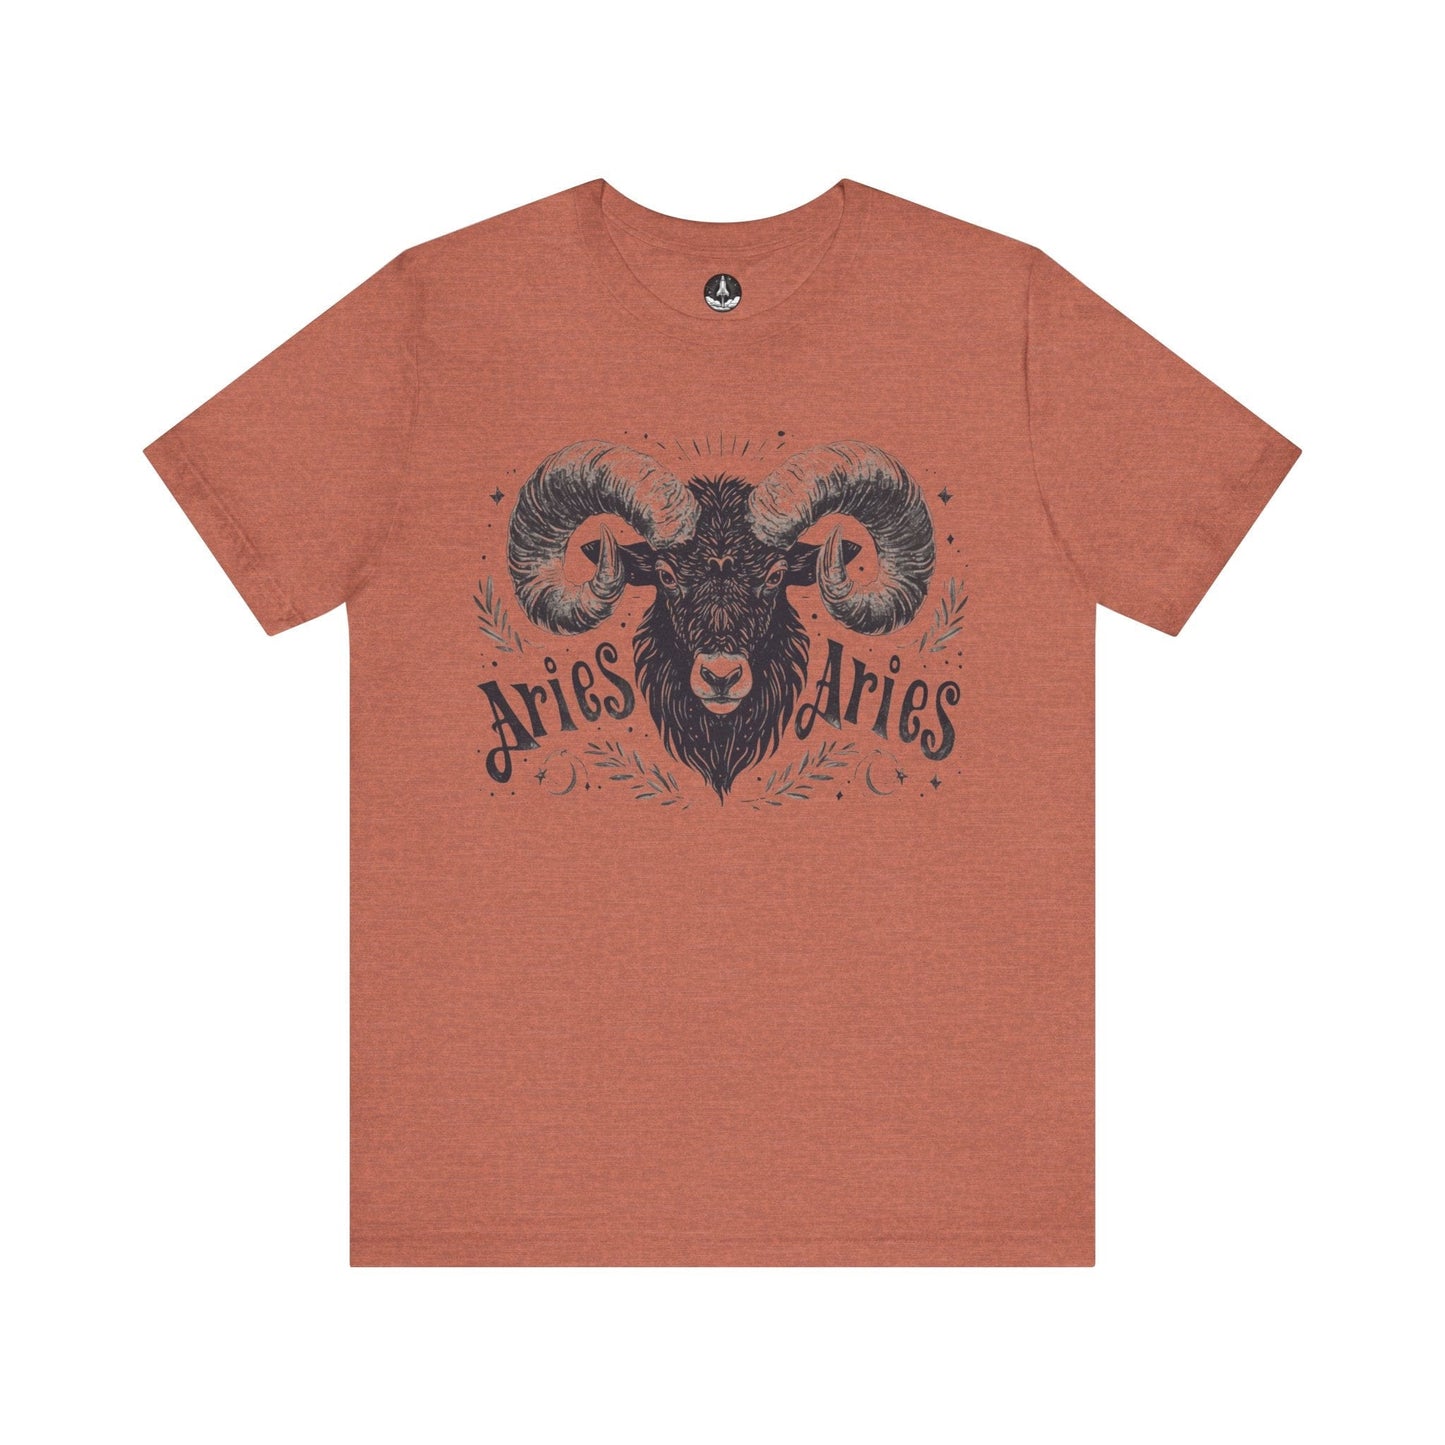 T-Shirt Heather Clay / S Aries Astrology Unisex TShirt: An Ode to the Maverick